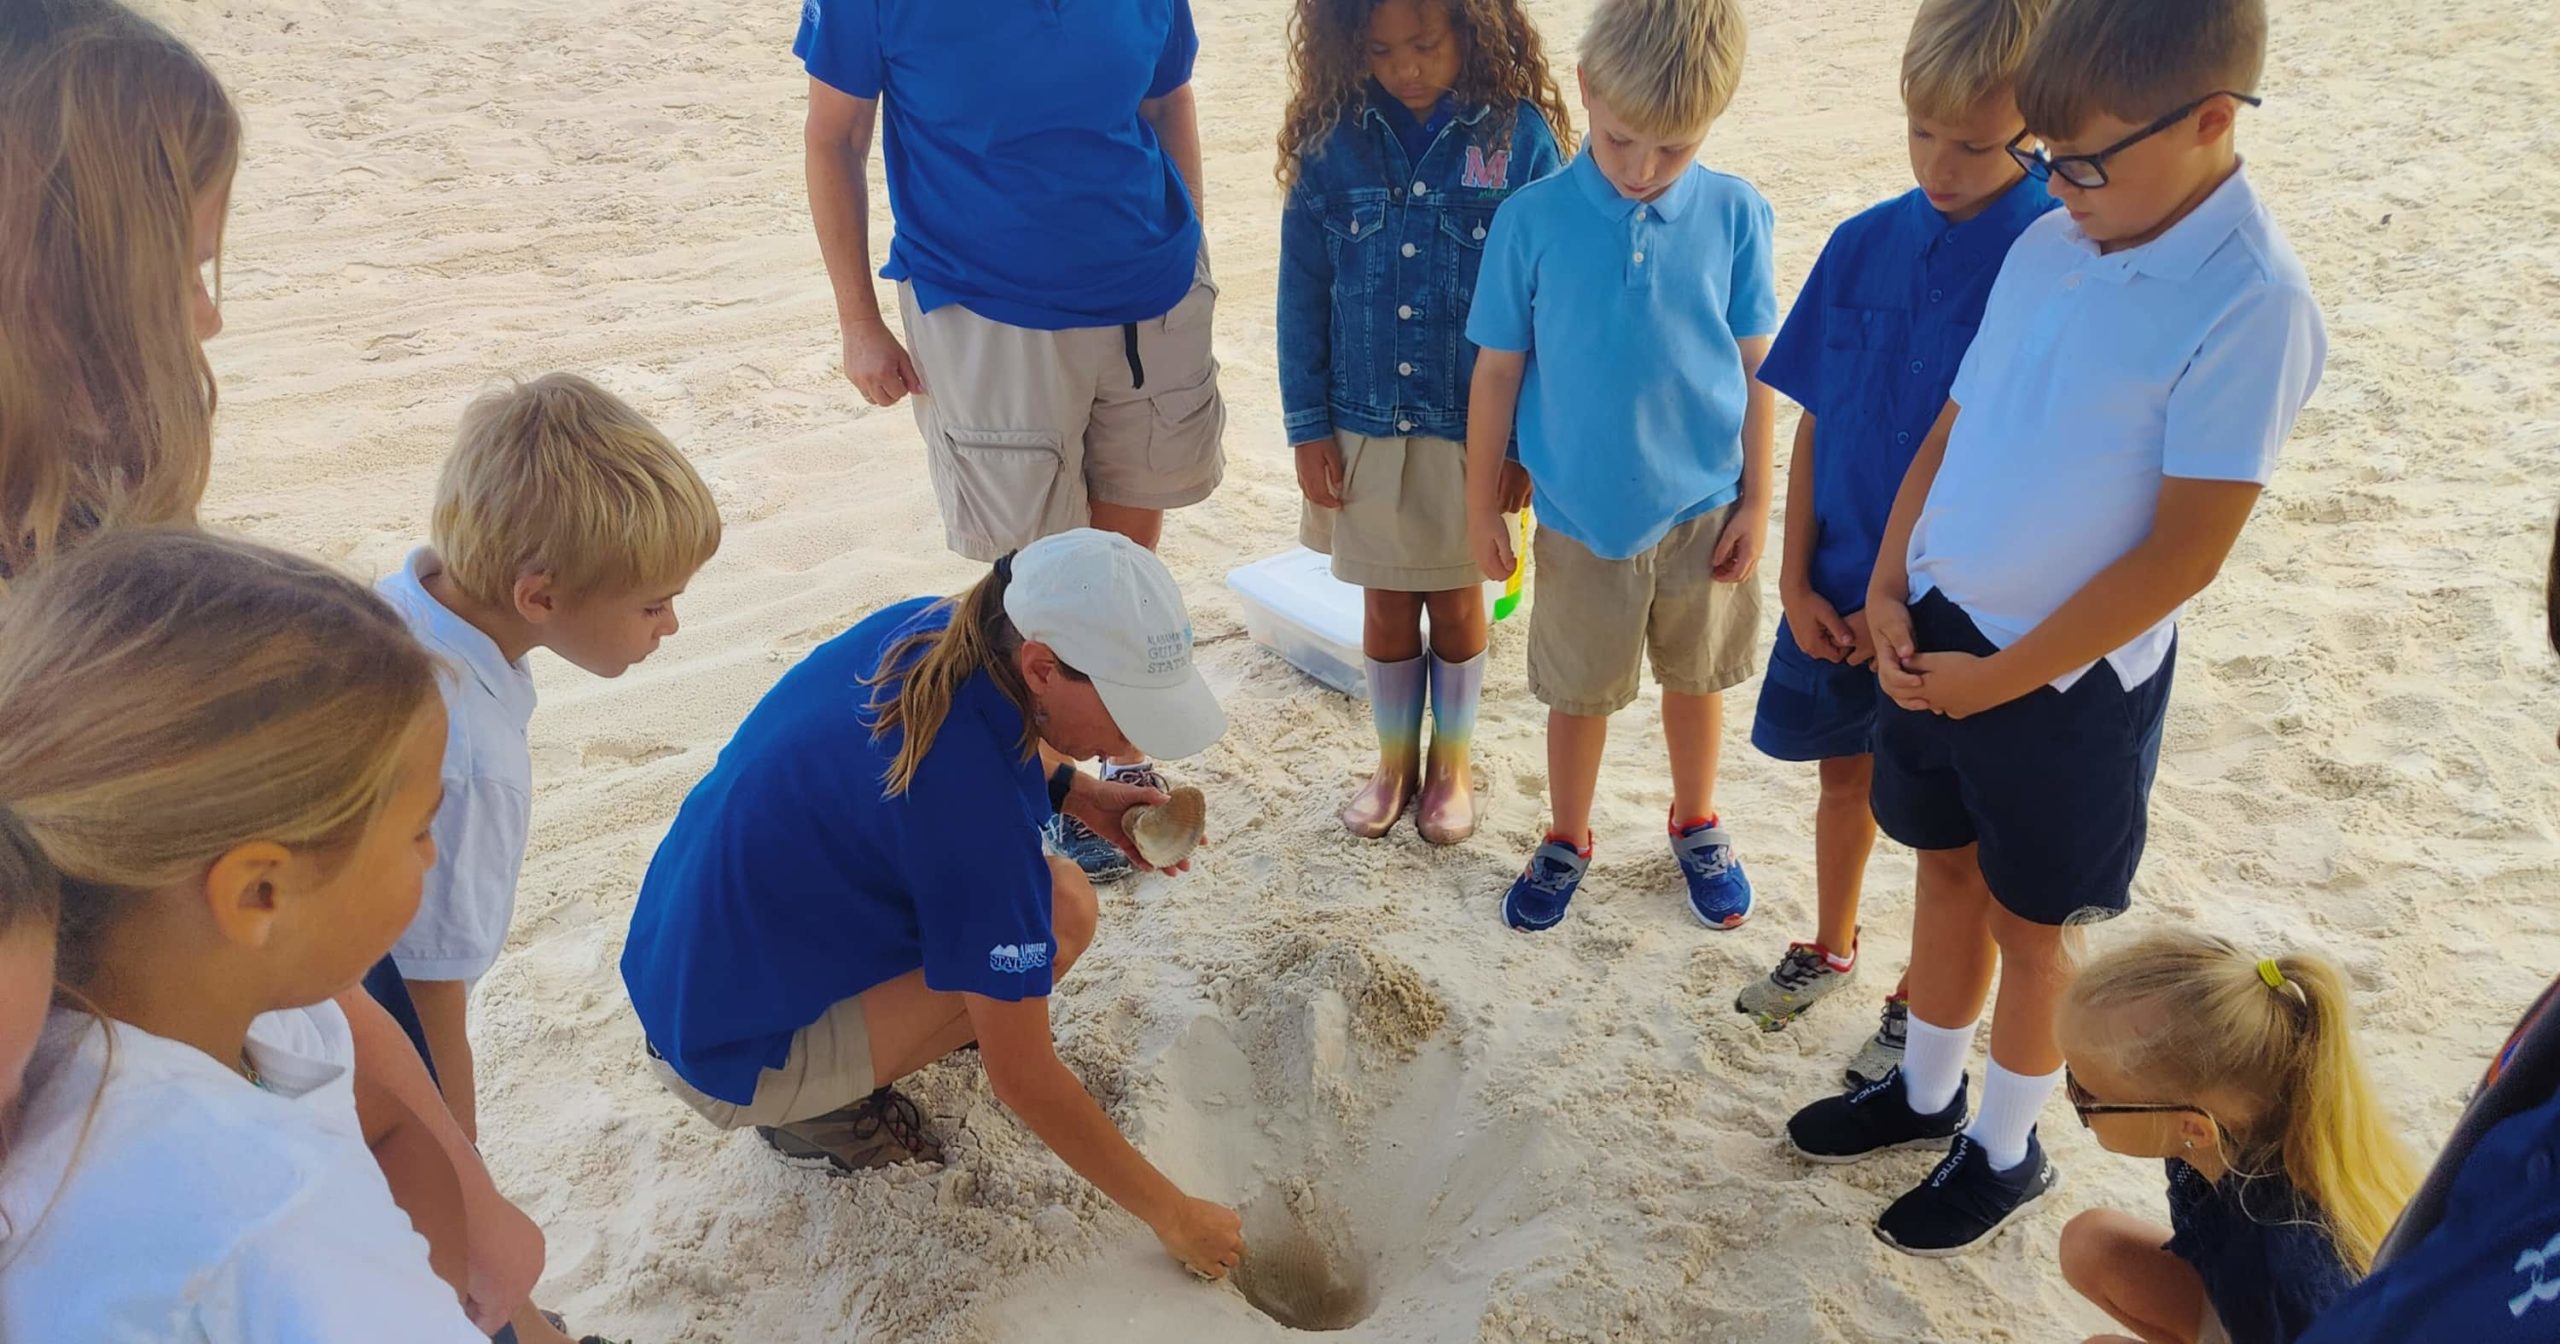 Kelly Reetz from the Gulf State Park demonstrates how sea turtles nest by digging a hole in the sand while a group of students observe her